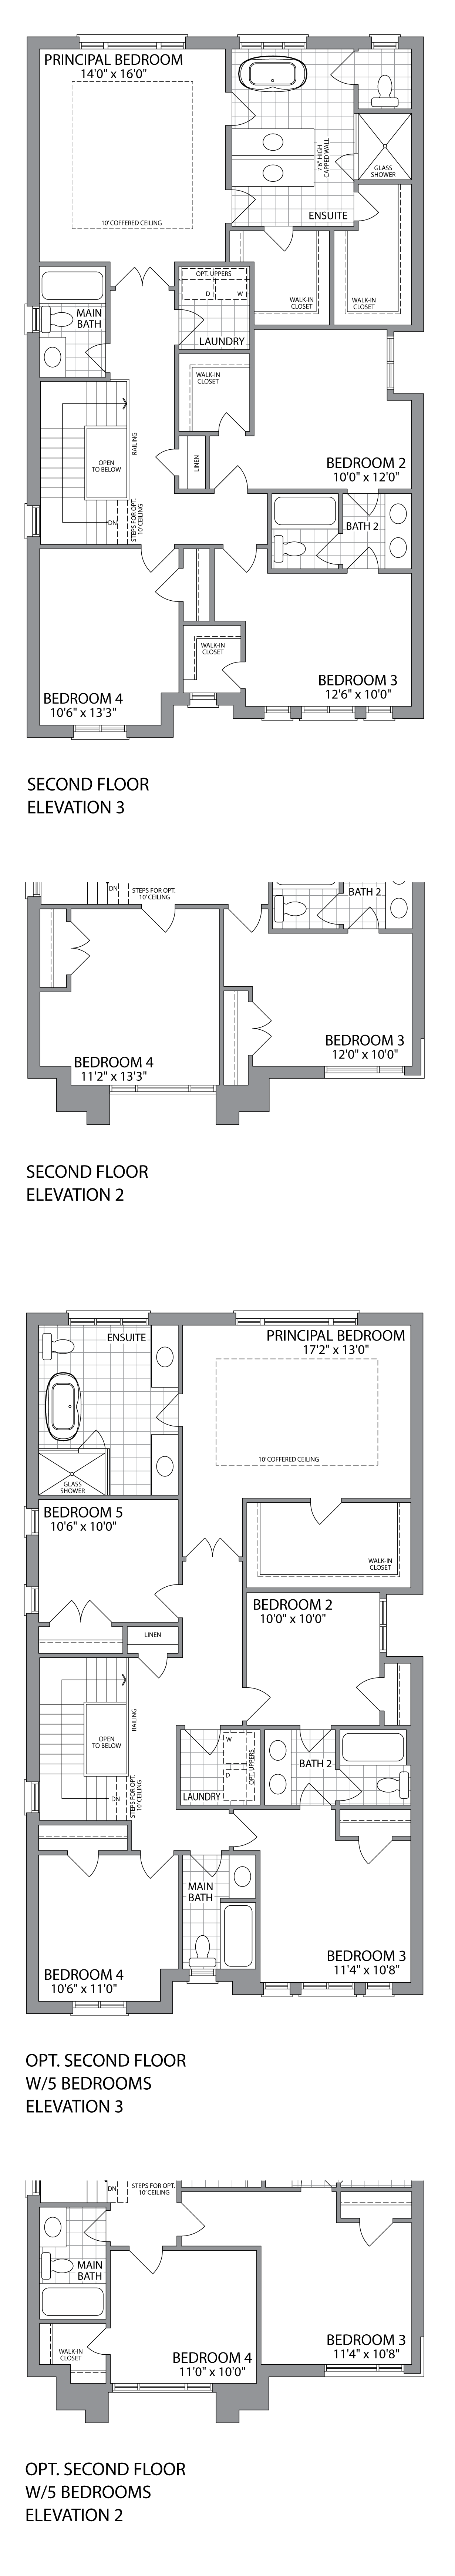 The BROOKHAVEN Second Floor